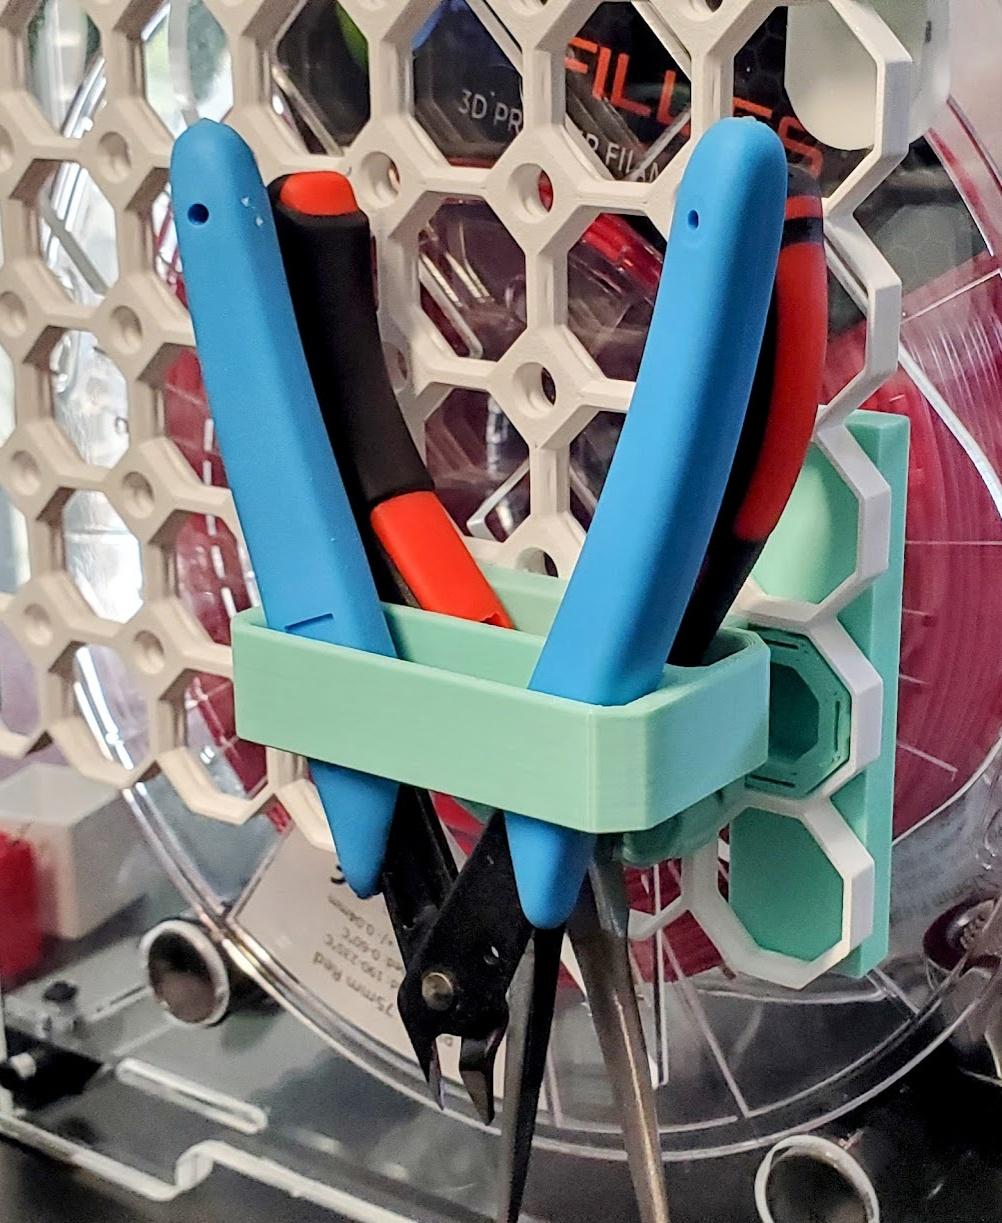 Multiboard Dual Flush Cutter, Needlenose Plier, Wire Stripper, and more Holder - My first Multiboard accessory! Prints super easy and attaches to the board with 2x https://than.gs/m/974363 - 3d model